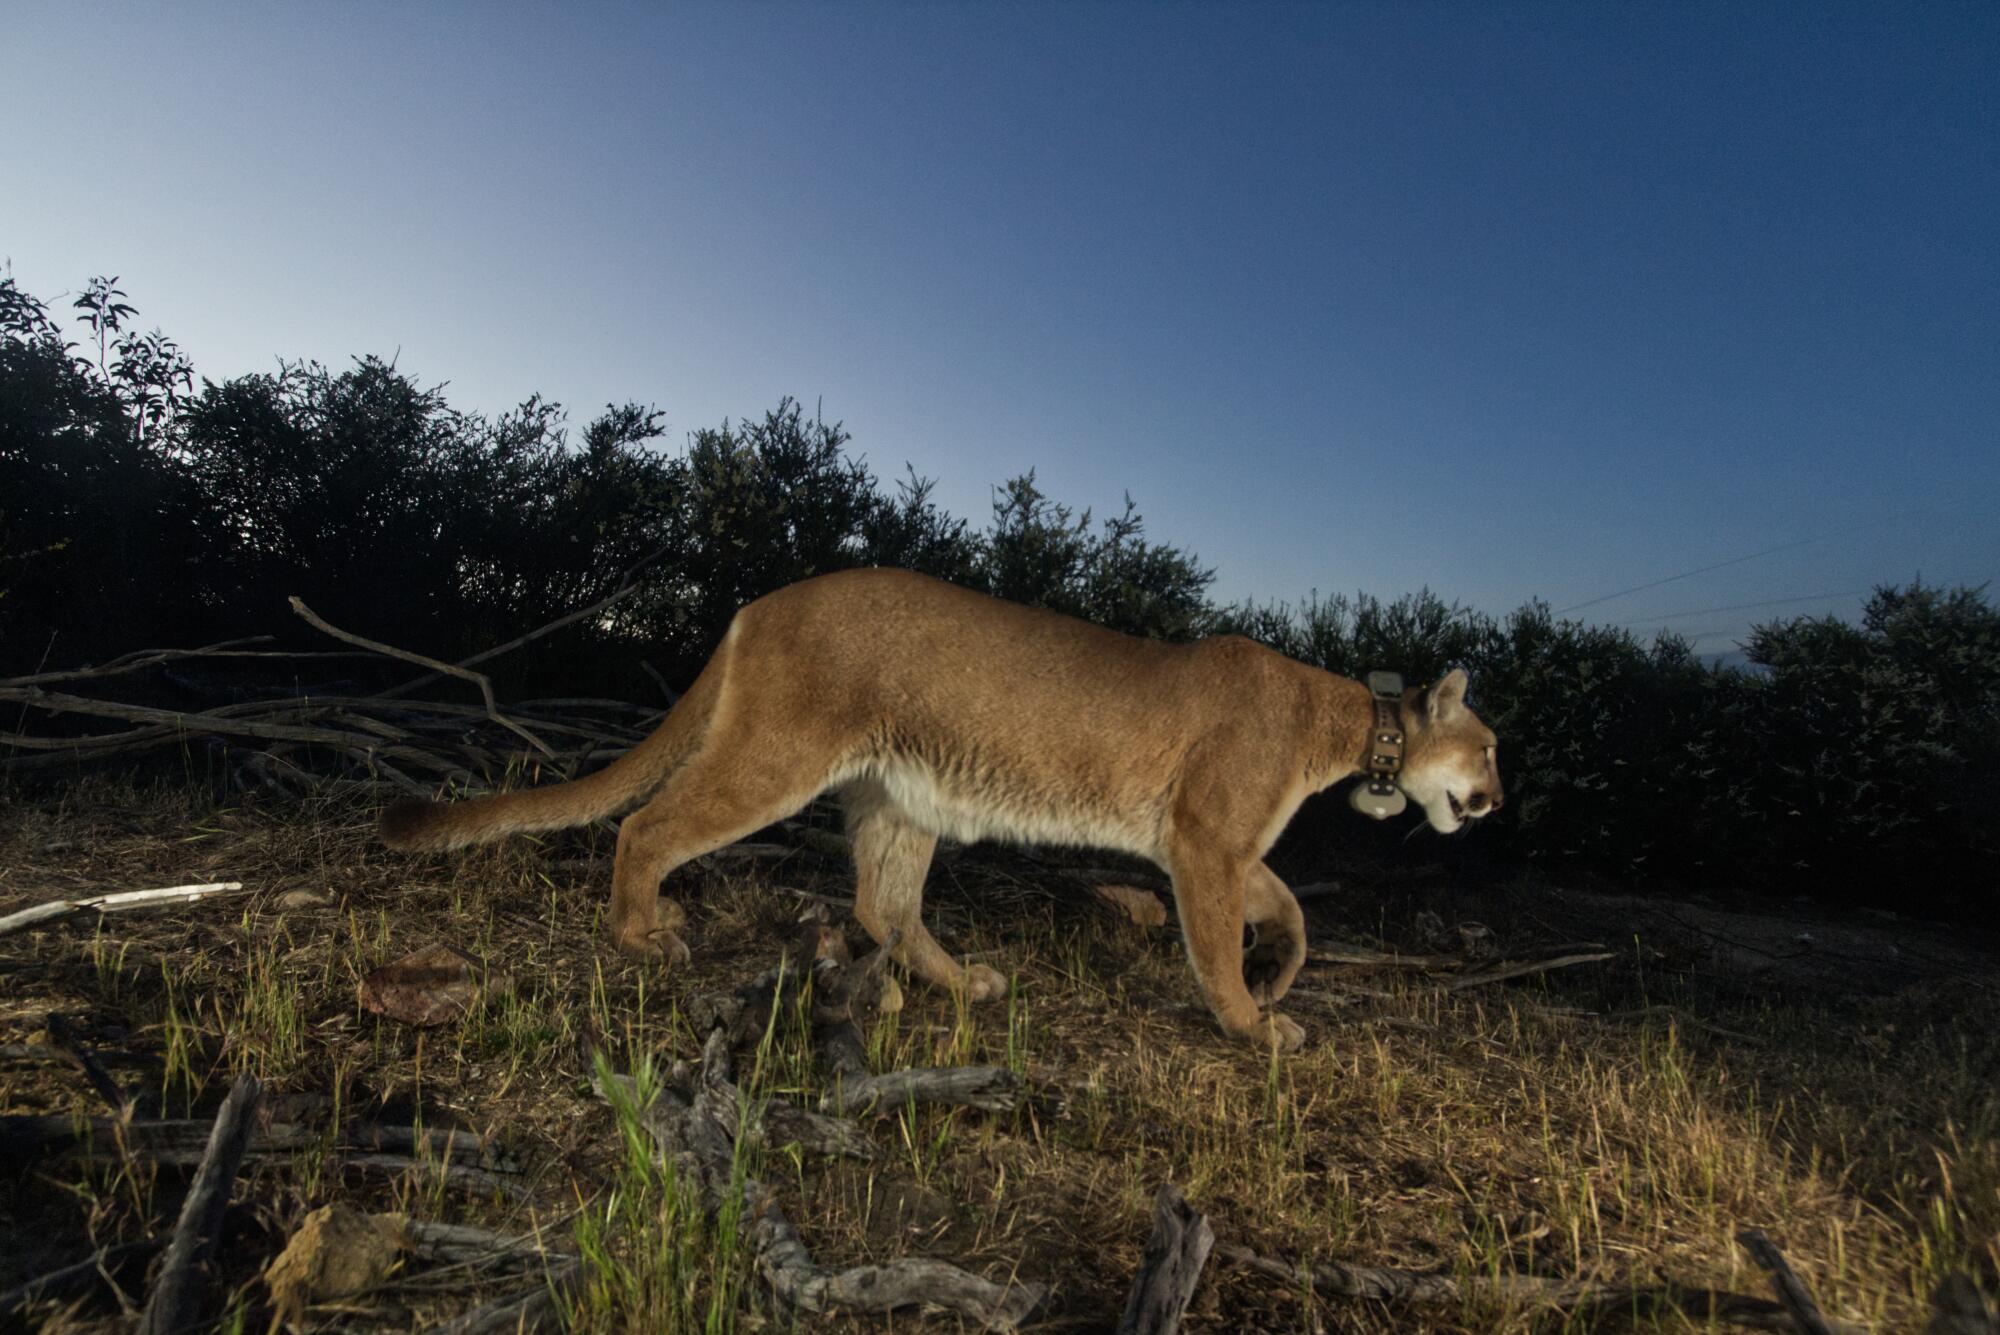 Adult female mountain lion P-65 on a grassy knoll against a background of trees at dusk